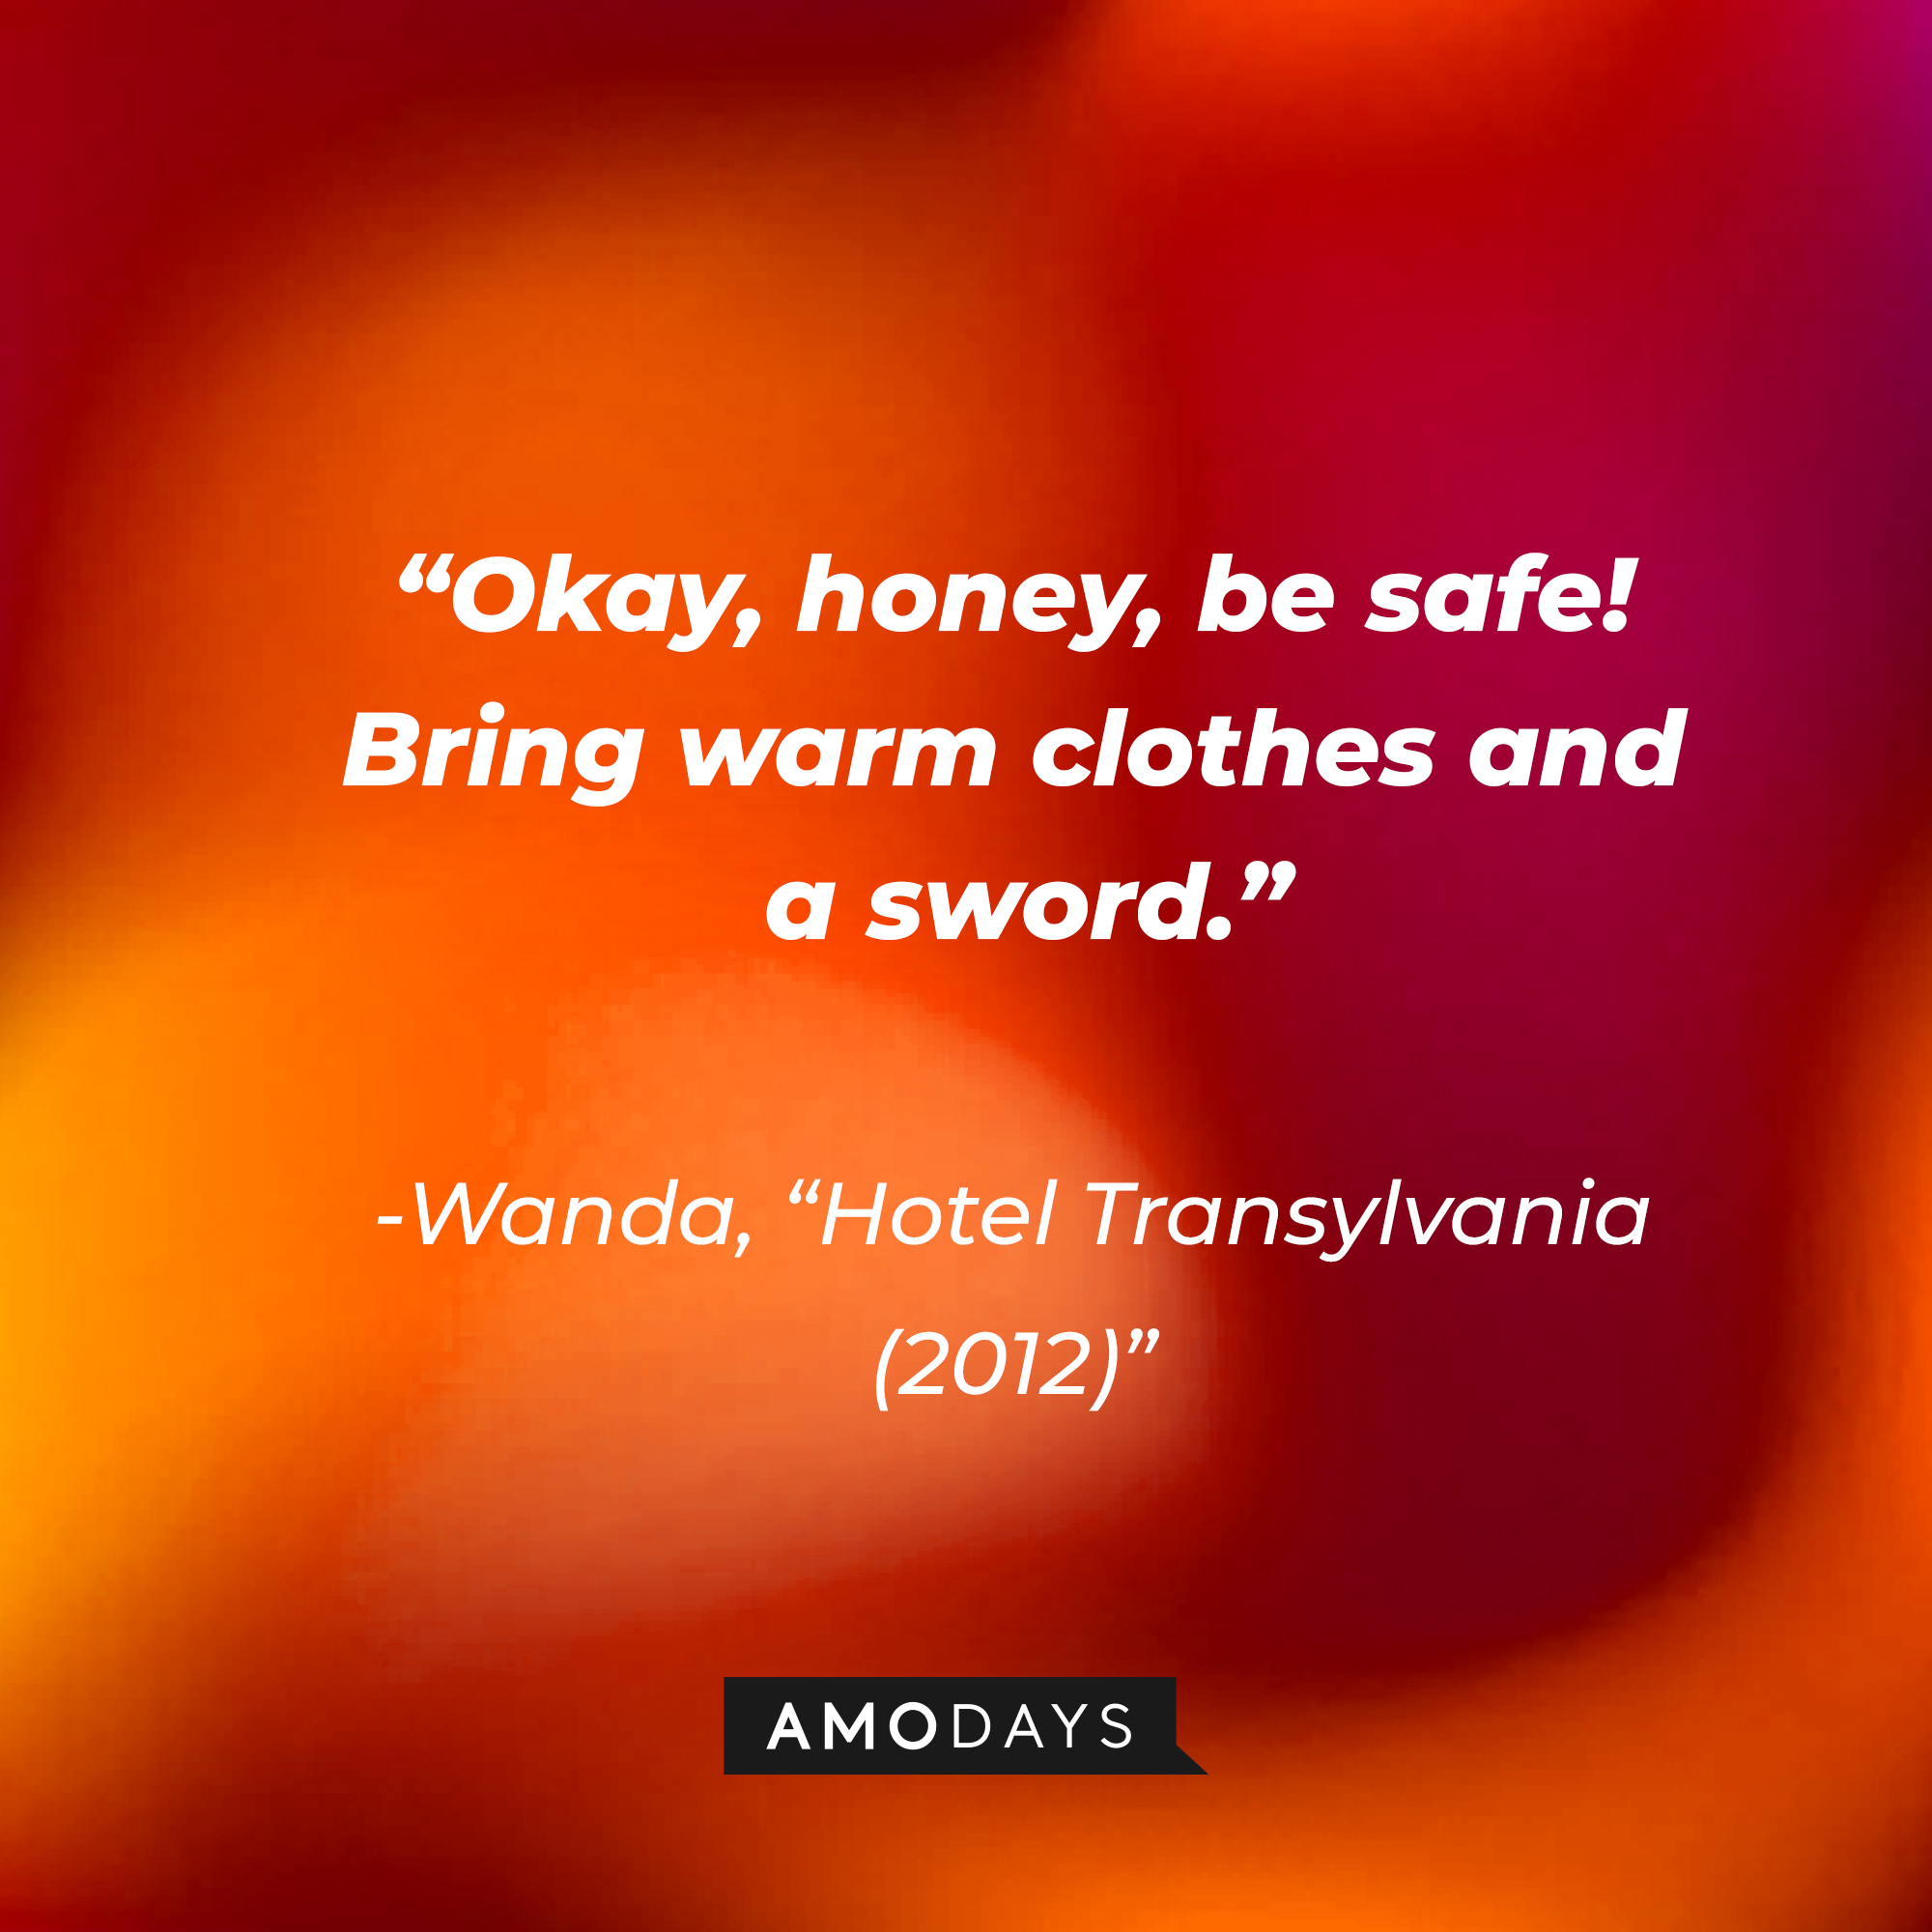 Wanda's quote: "Okay, honey, be safe! Bring warm clothes and a sword." | Source: Amodays